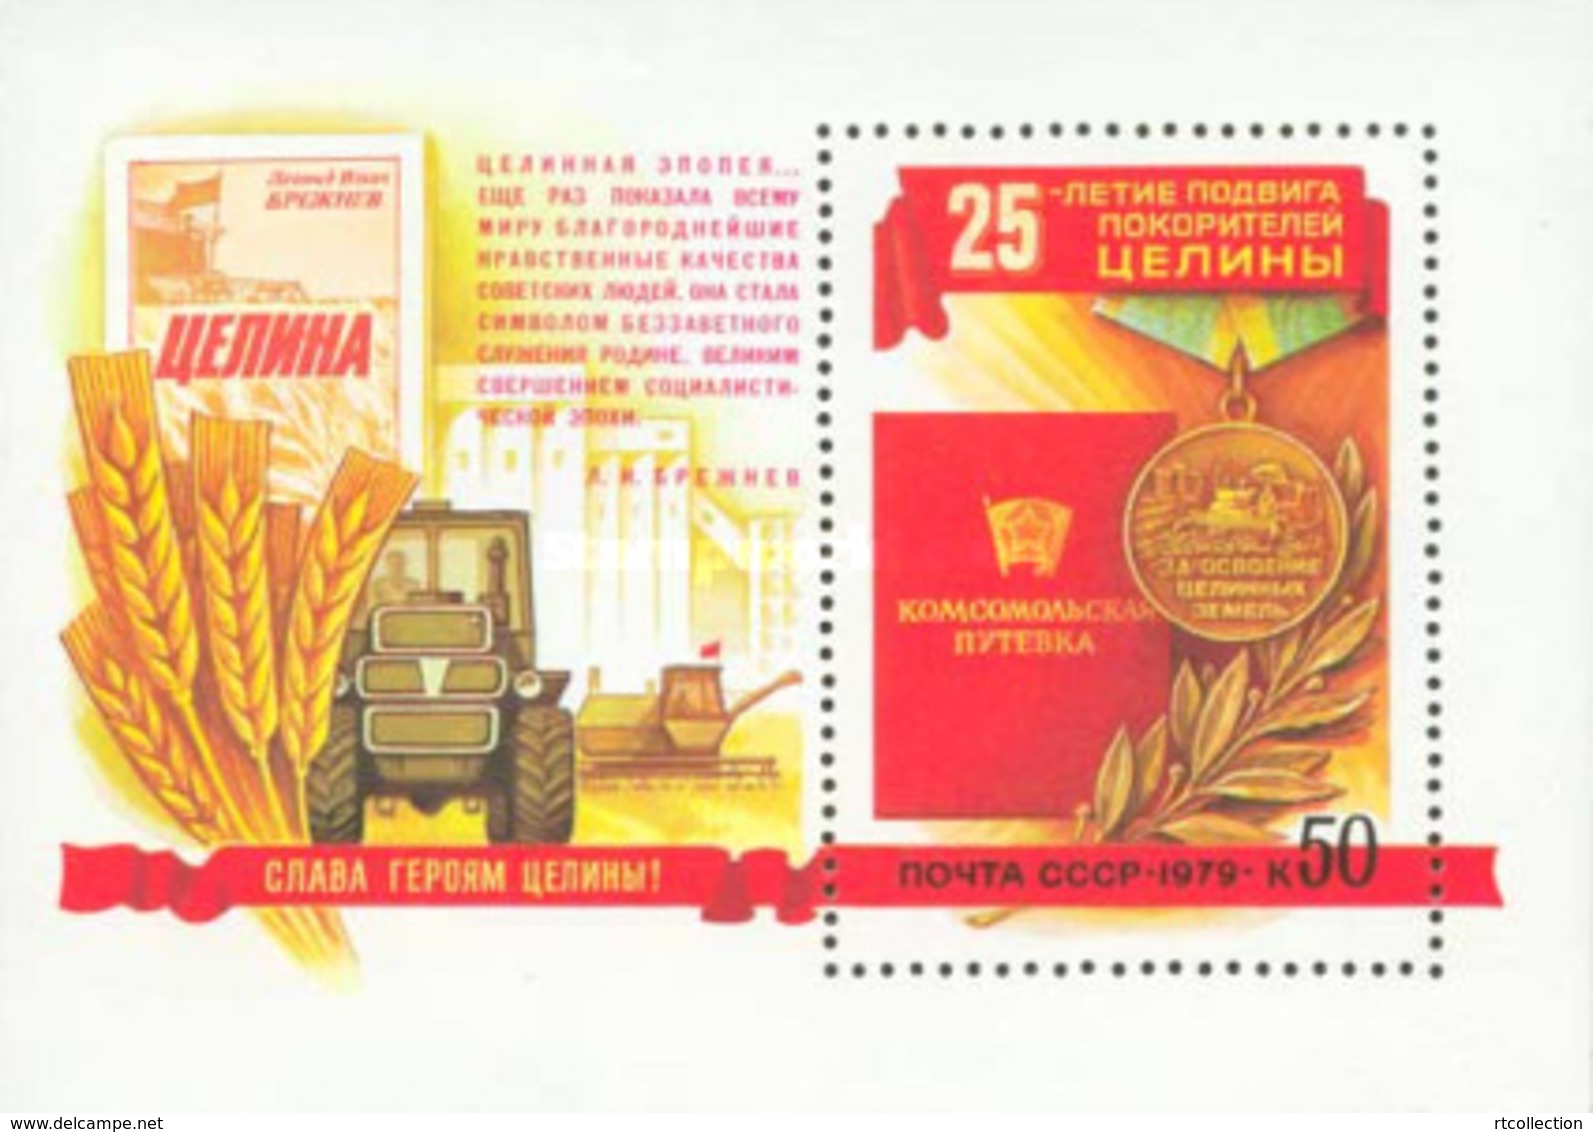 USSR Russia 1979 25th Anniv Development Disused Drive Develop Virgin Lands Tractor Agriculture S/S Stamp MNH Mi BL135 - Agriculture